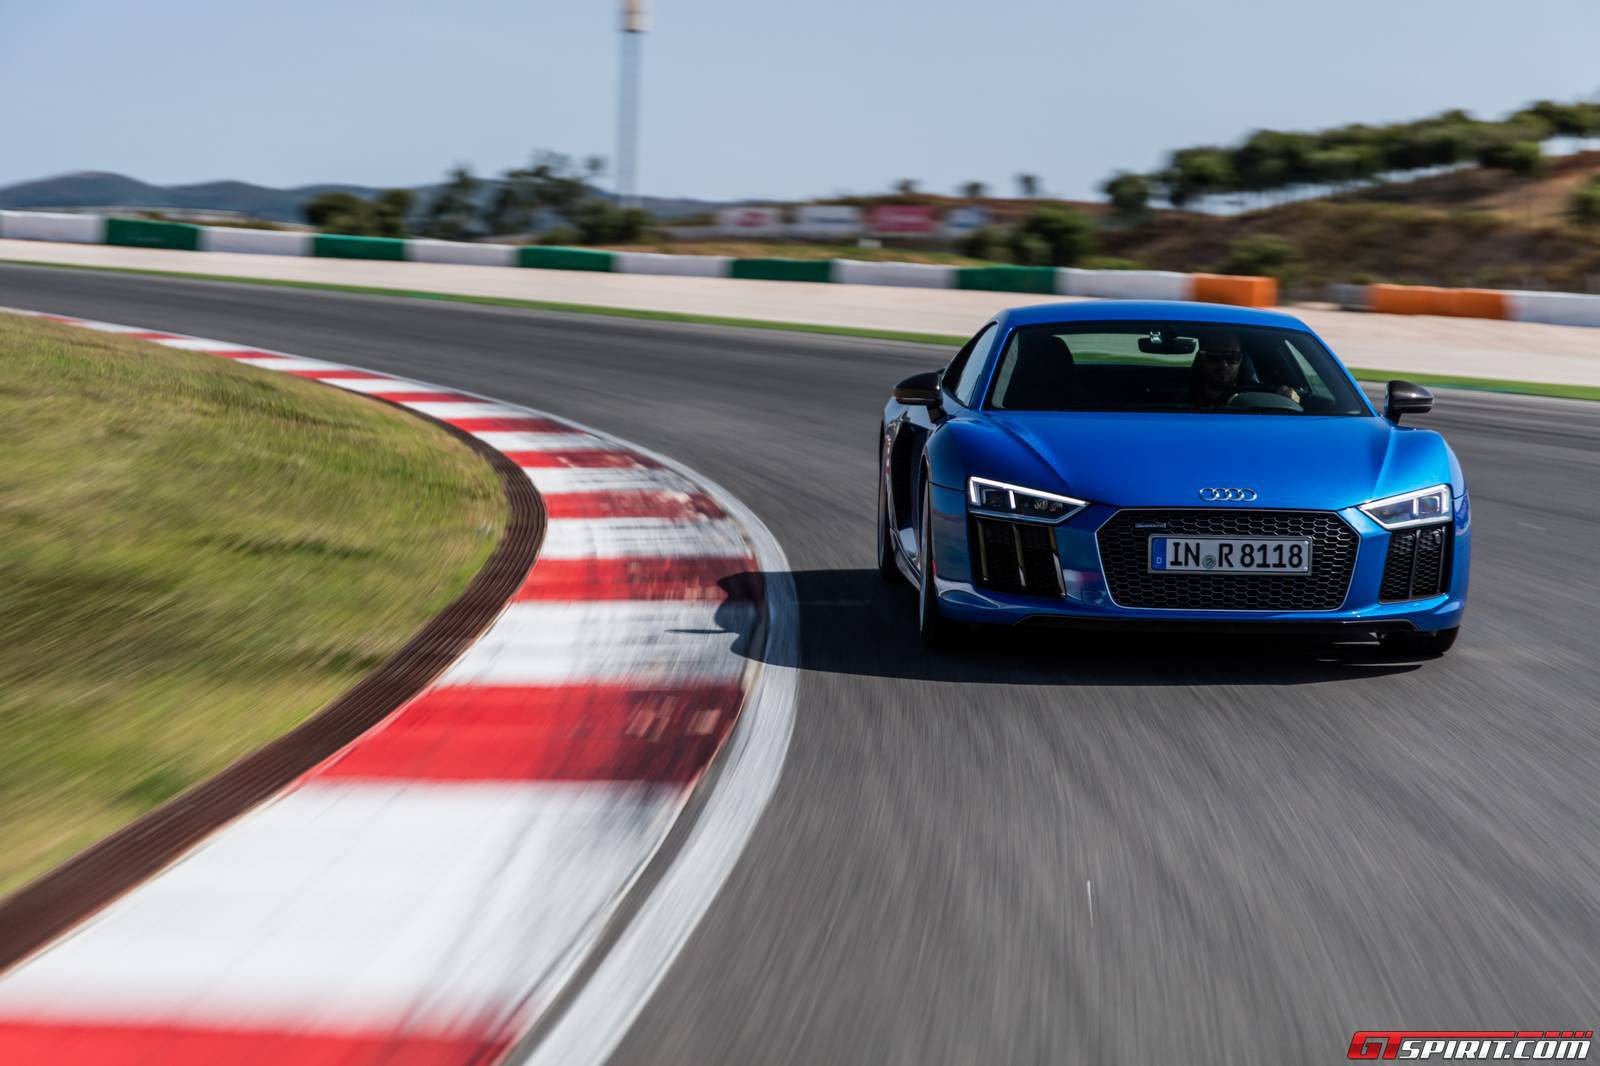 2016 Audi R8 V10 Plus on road and track